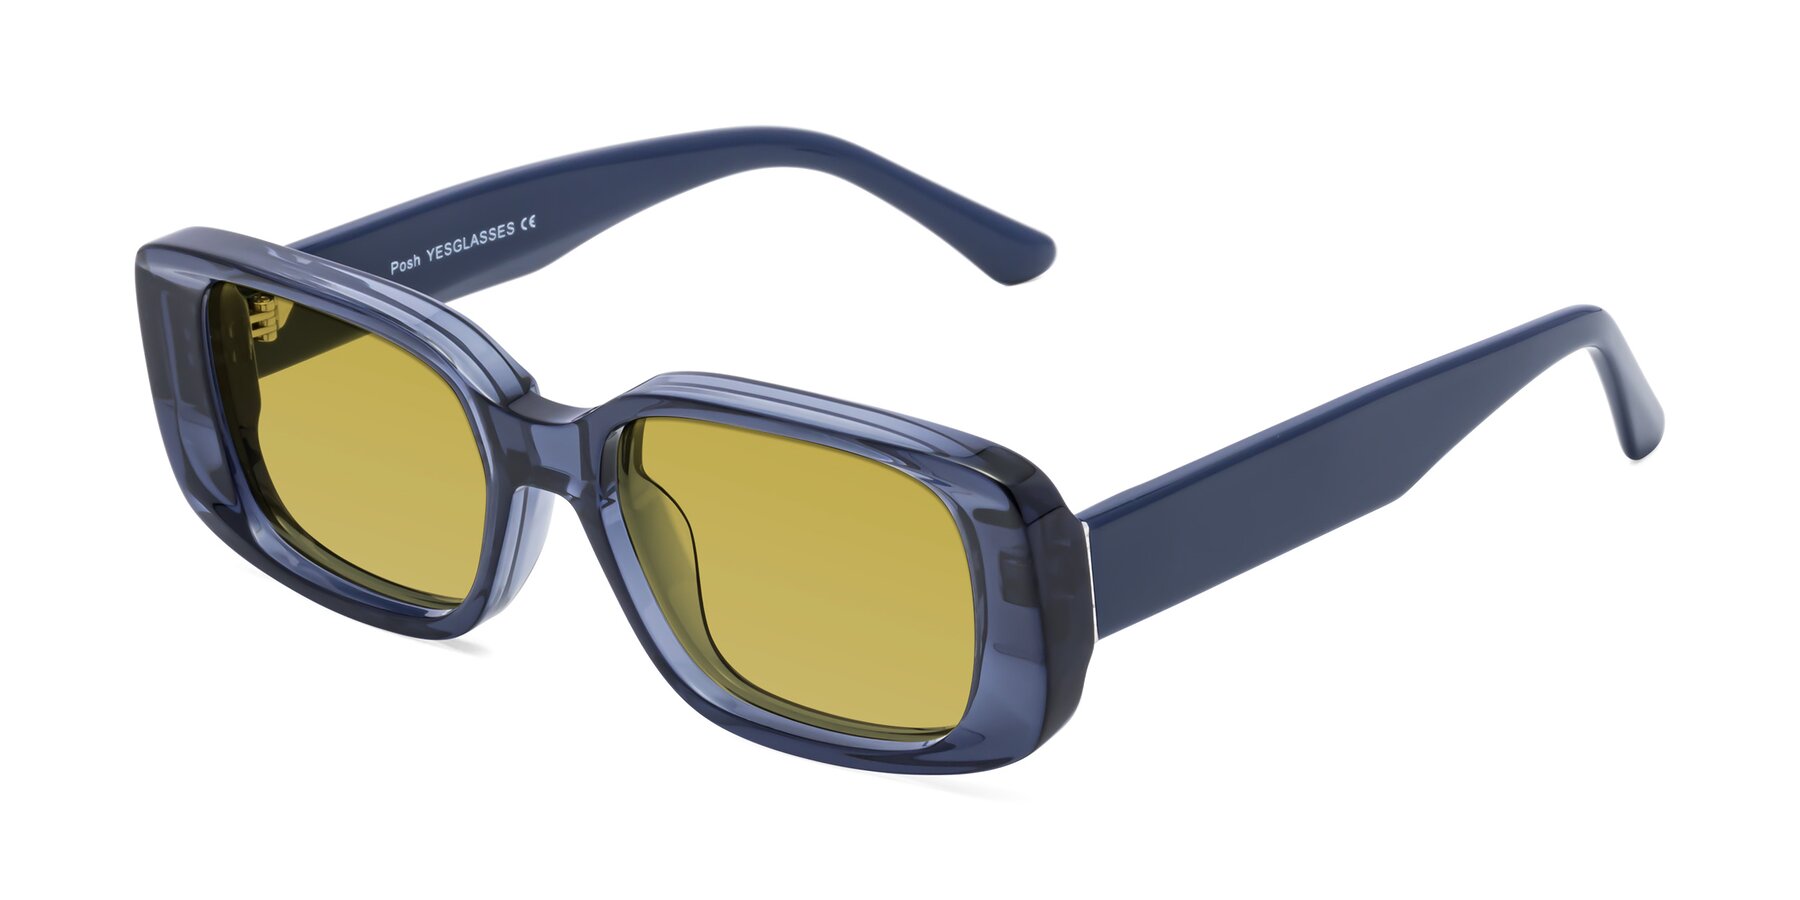 Angle of Posh in Translucent Blue with Champagne Tinted Lenses